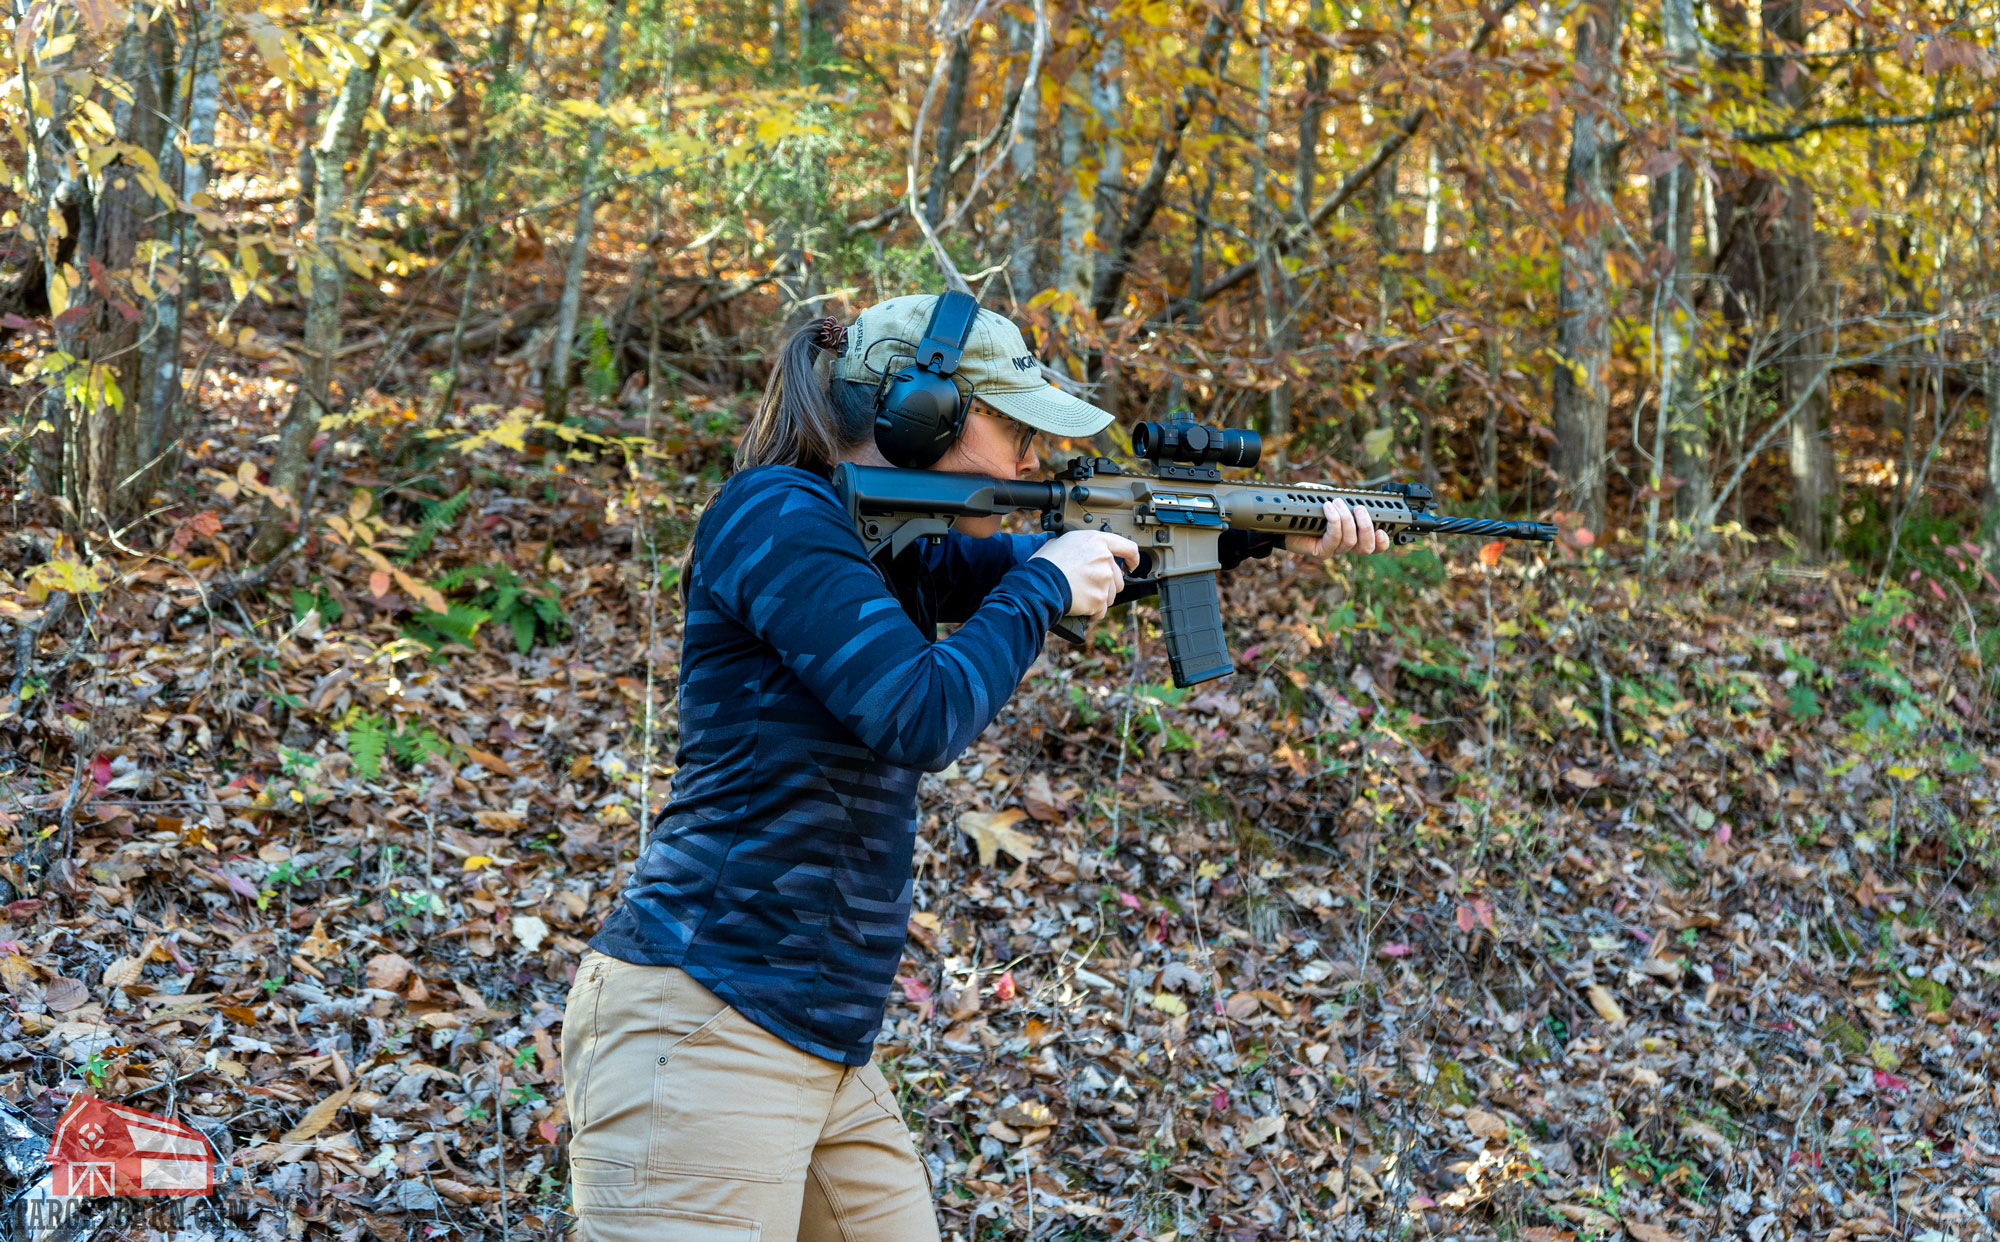 the author at the range shooting an ar-15